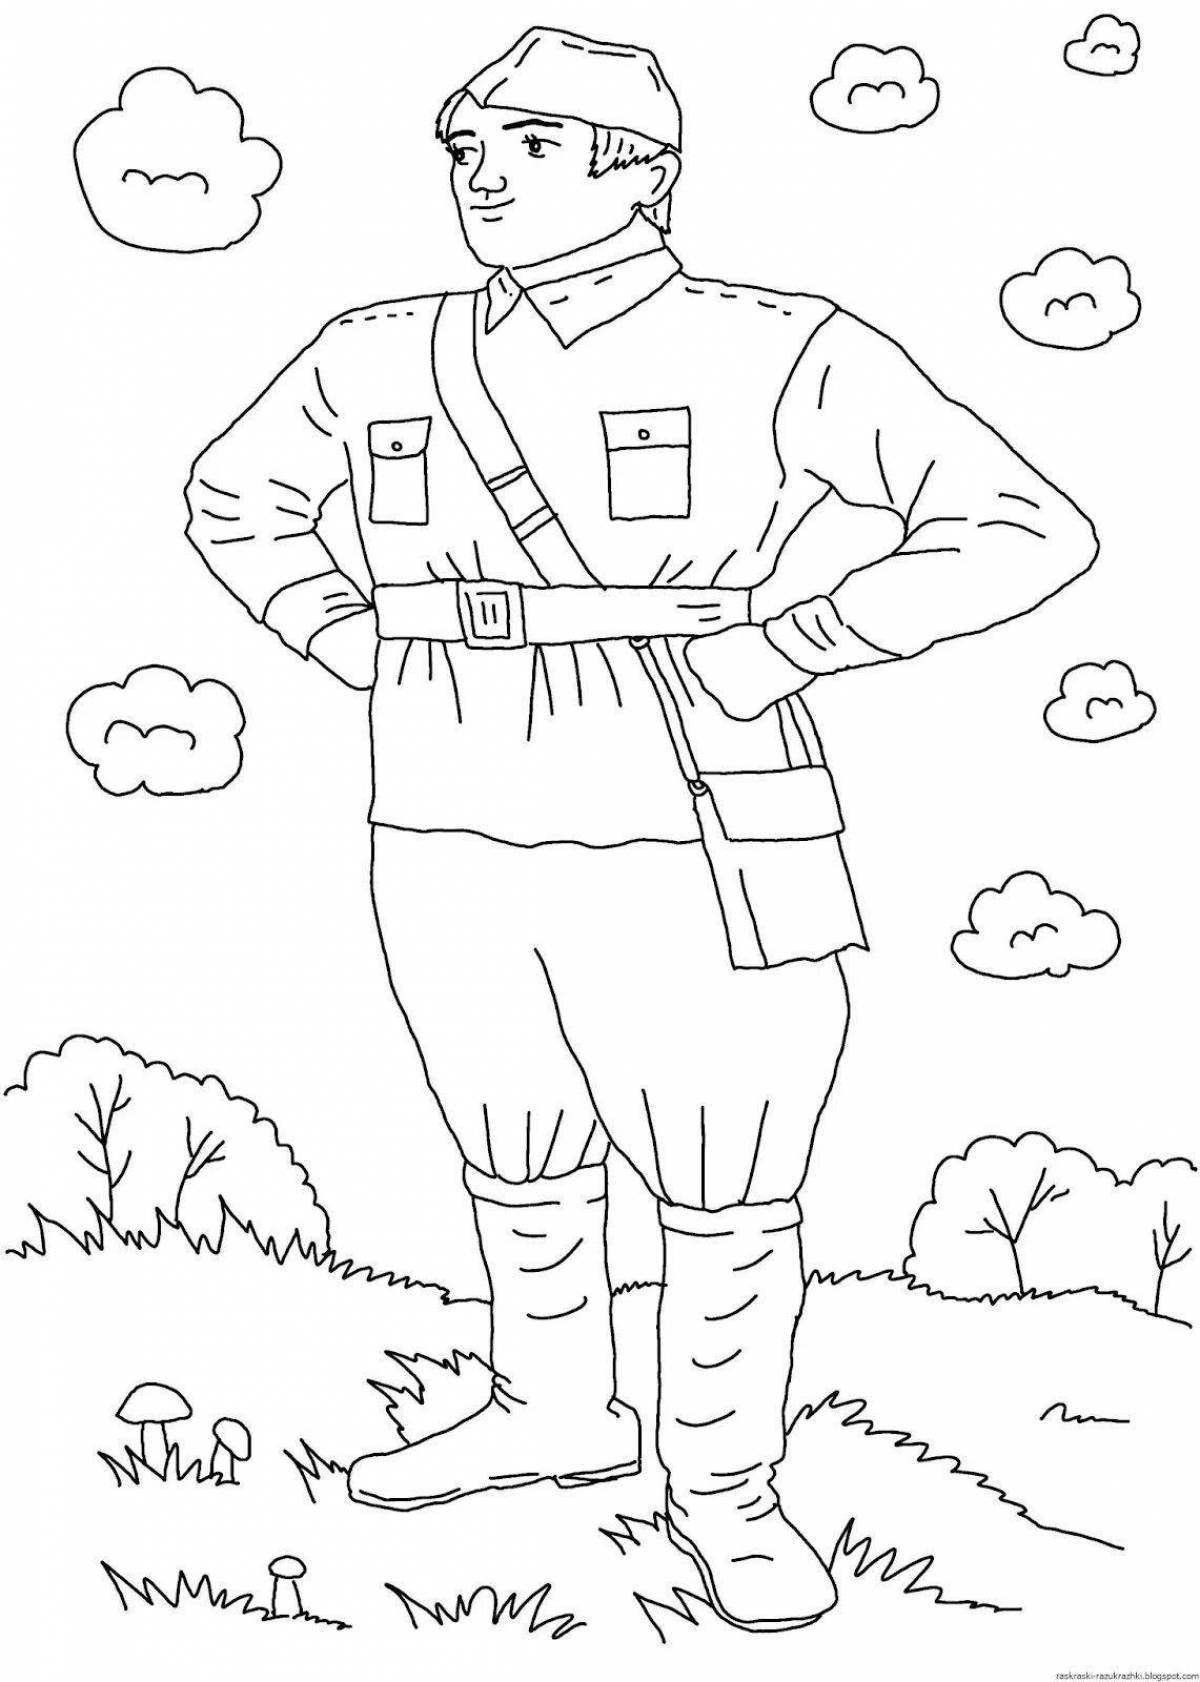 Joyful military profession coloring book for kids